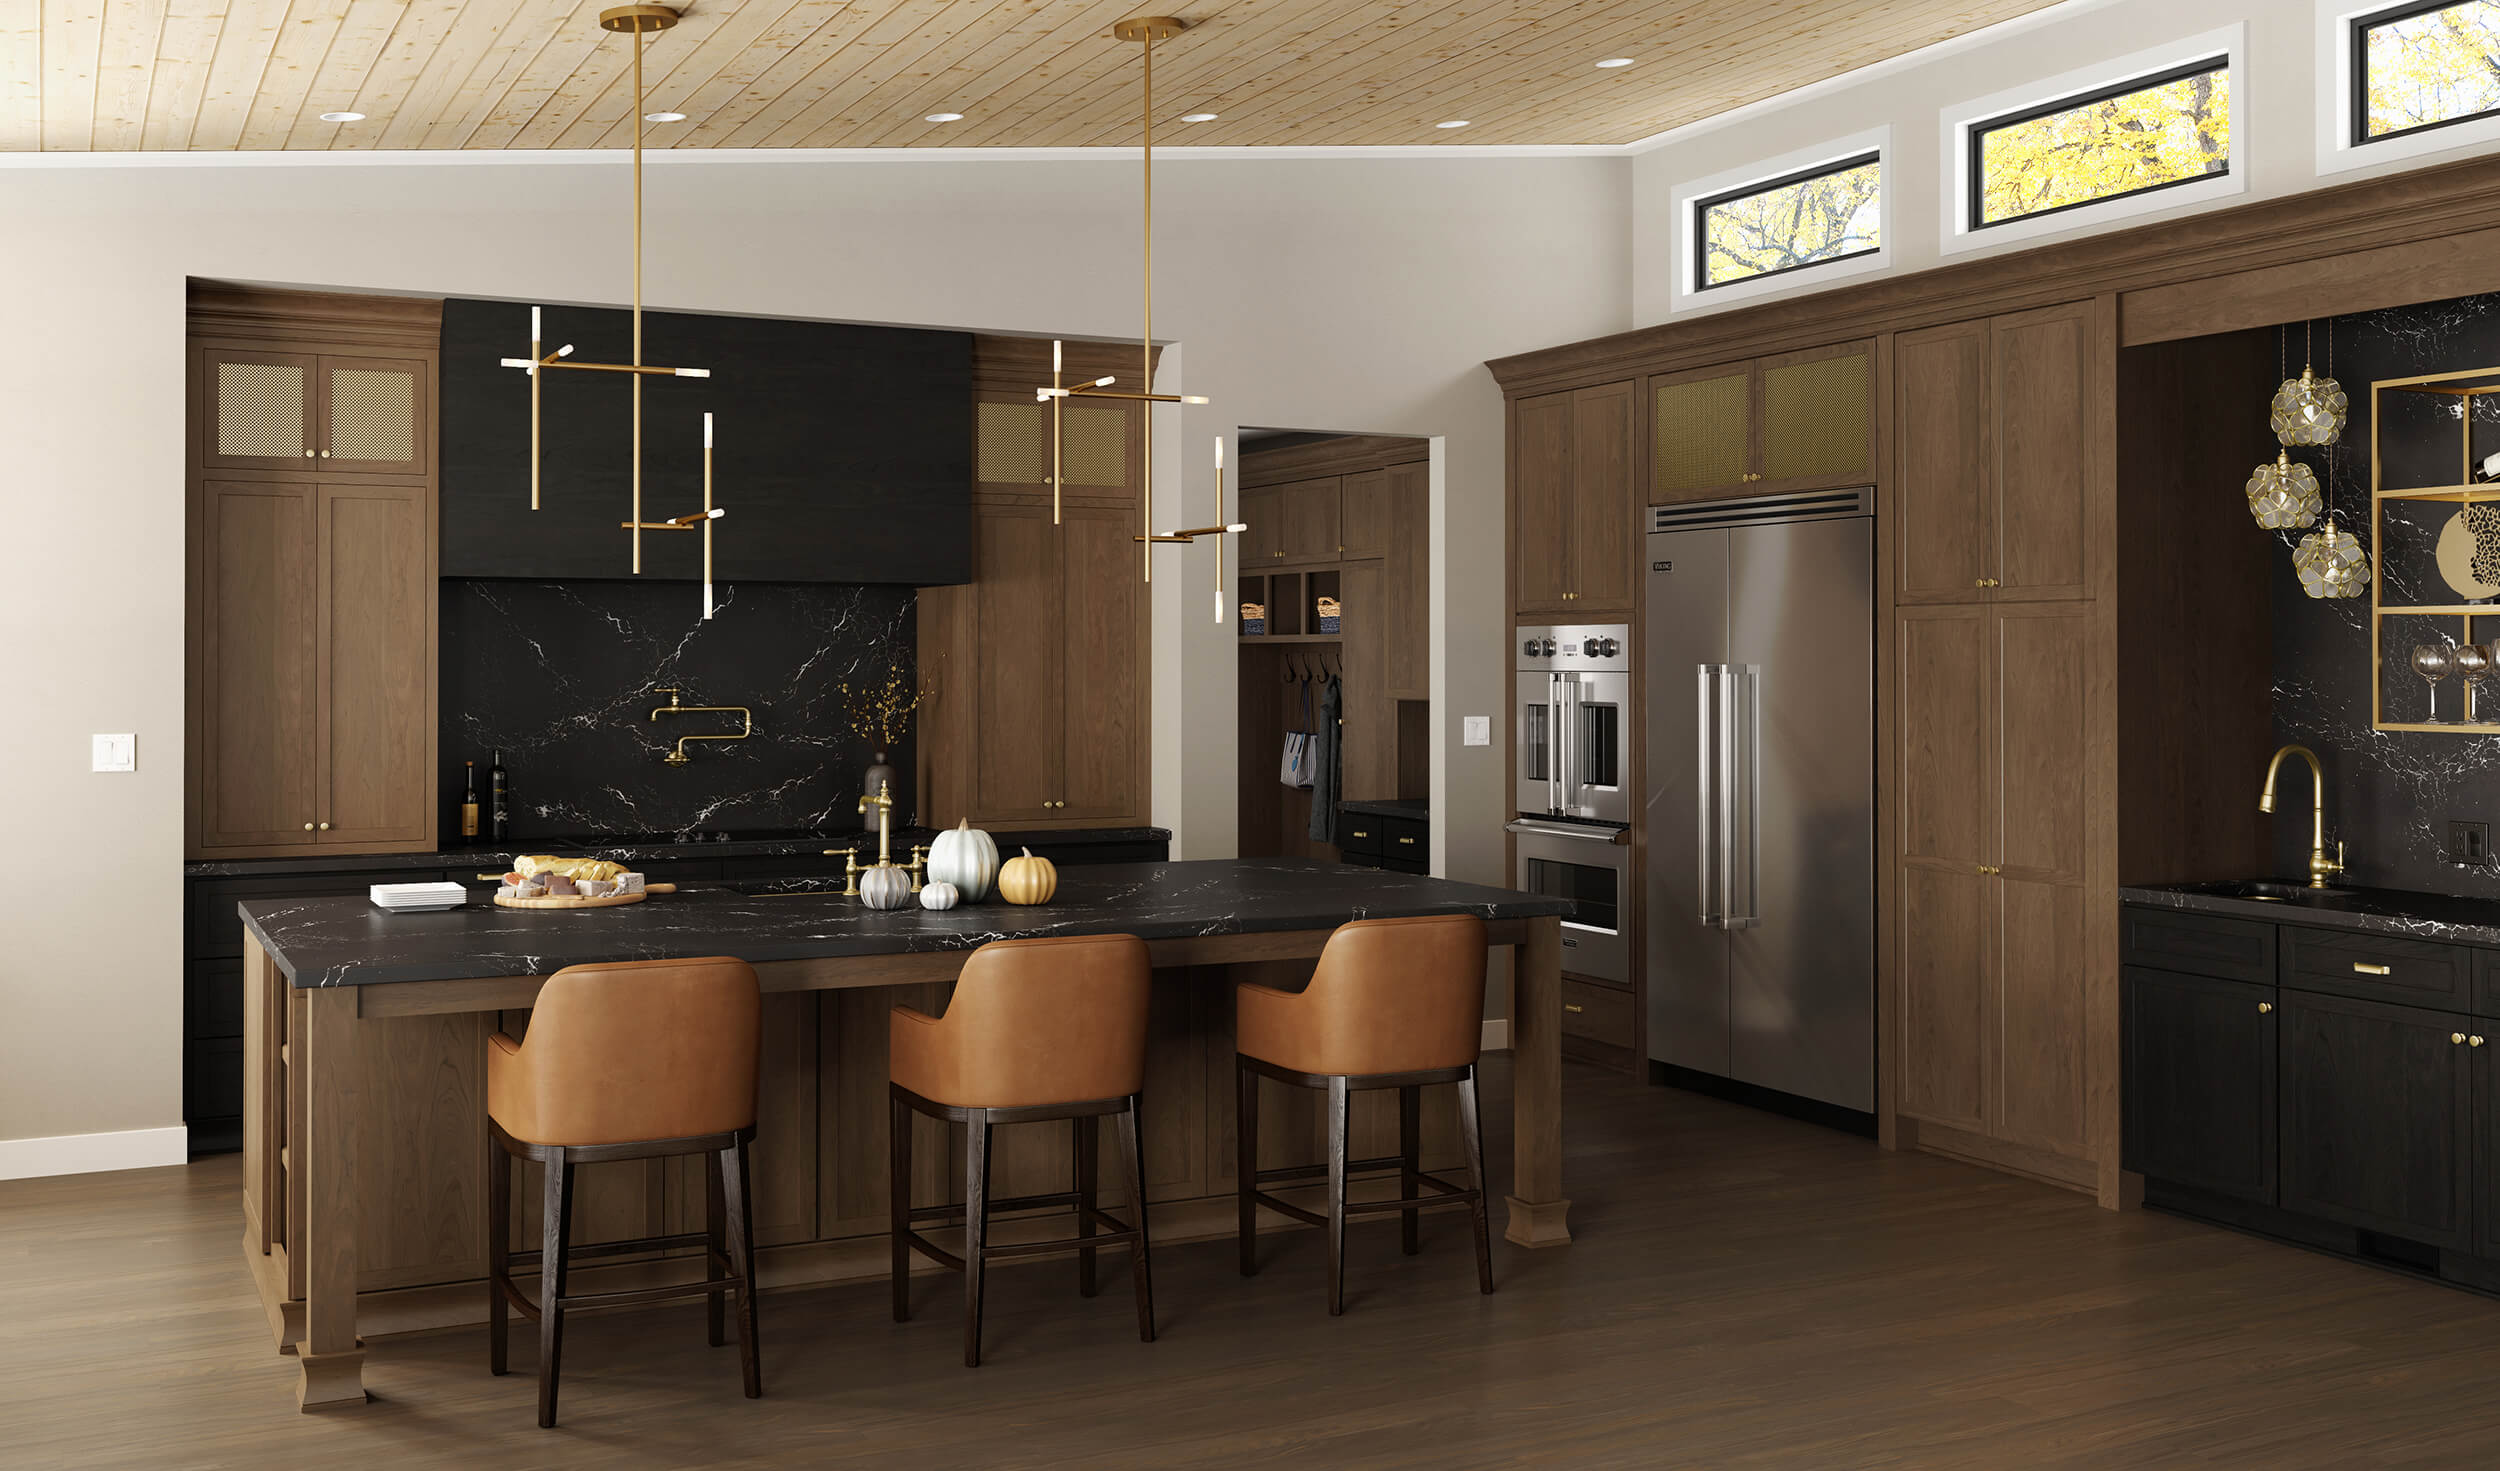 A modern kitchen with traditionally framed cabinets in a mix of brown stained wood and black stained wood.